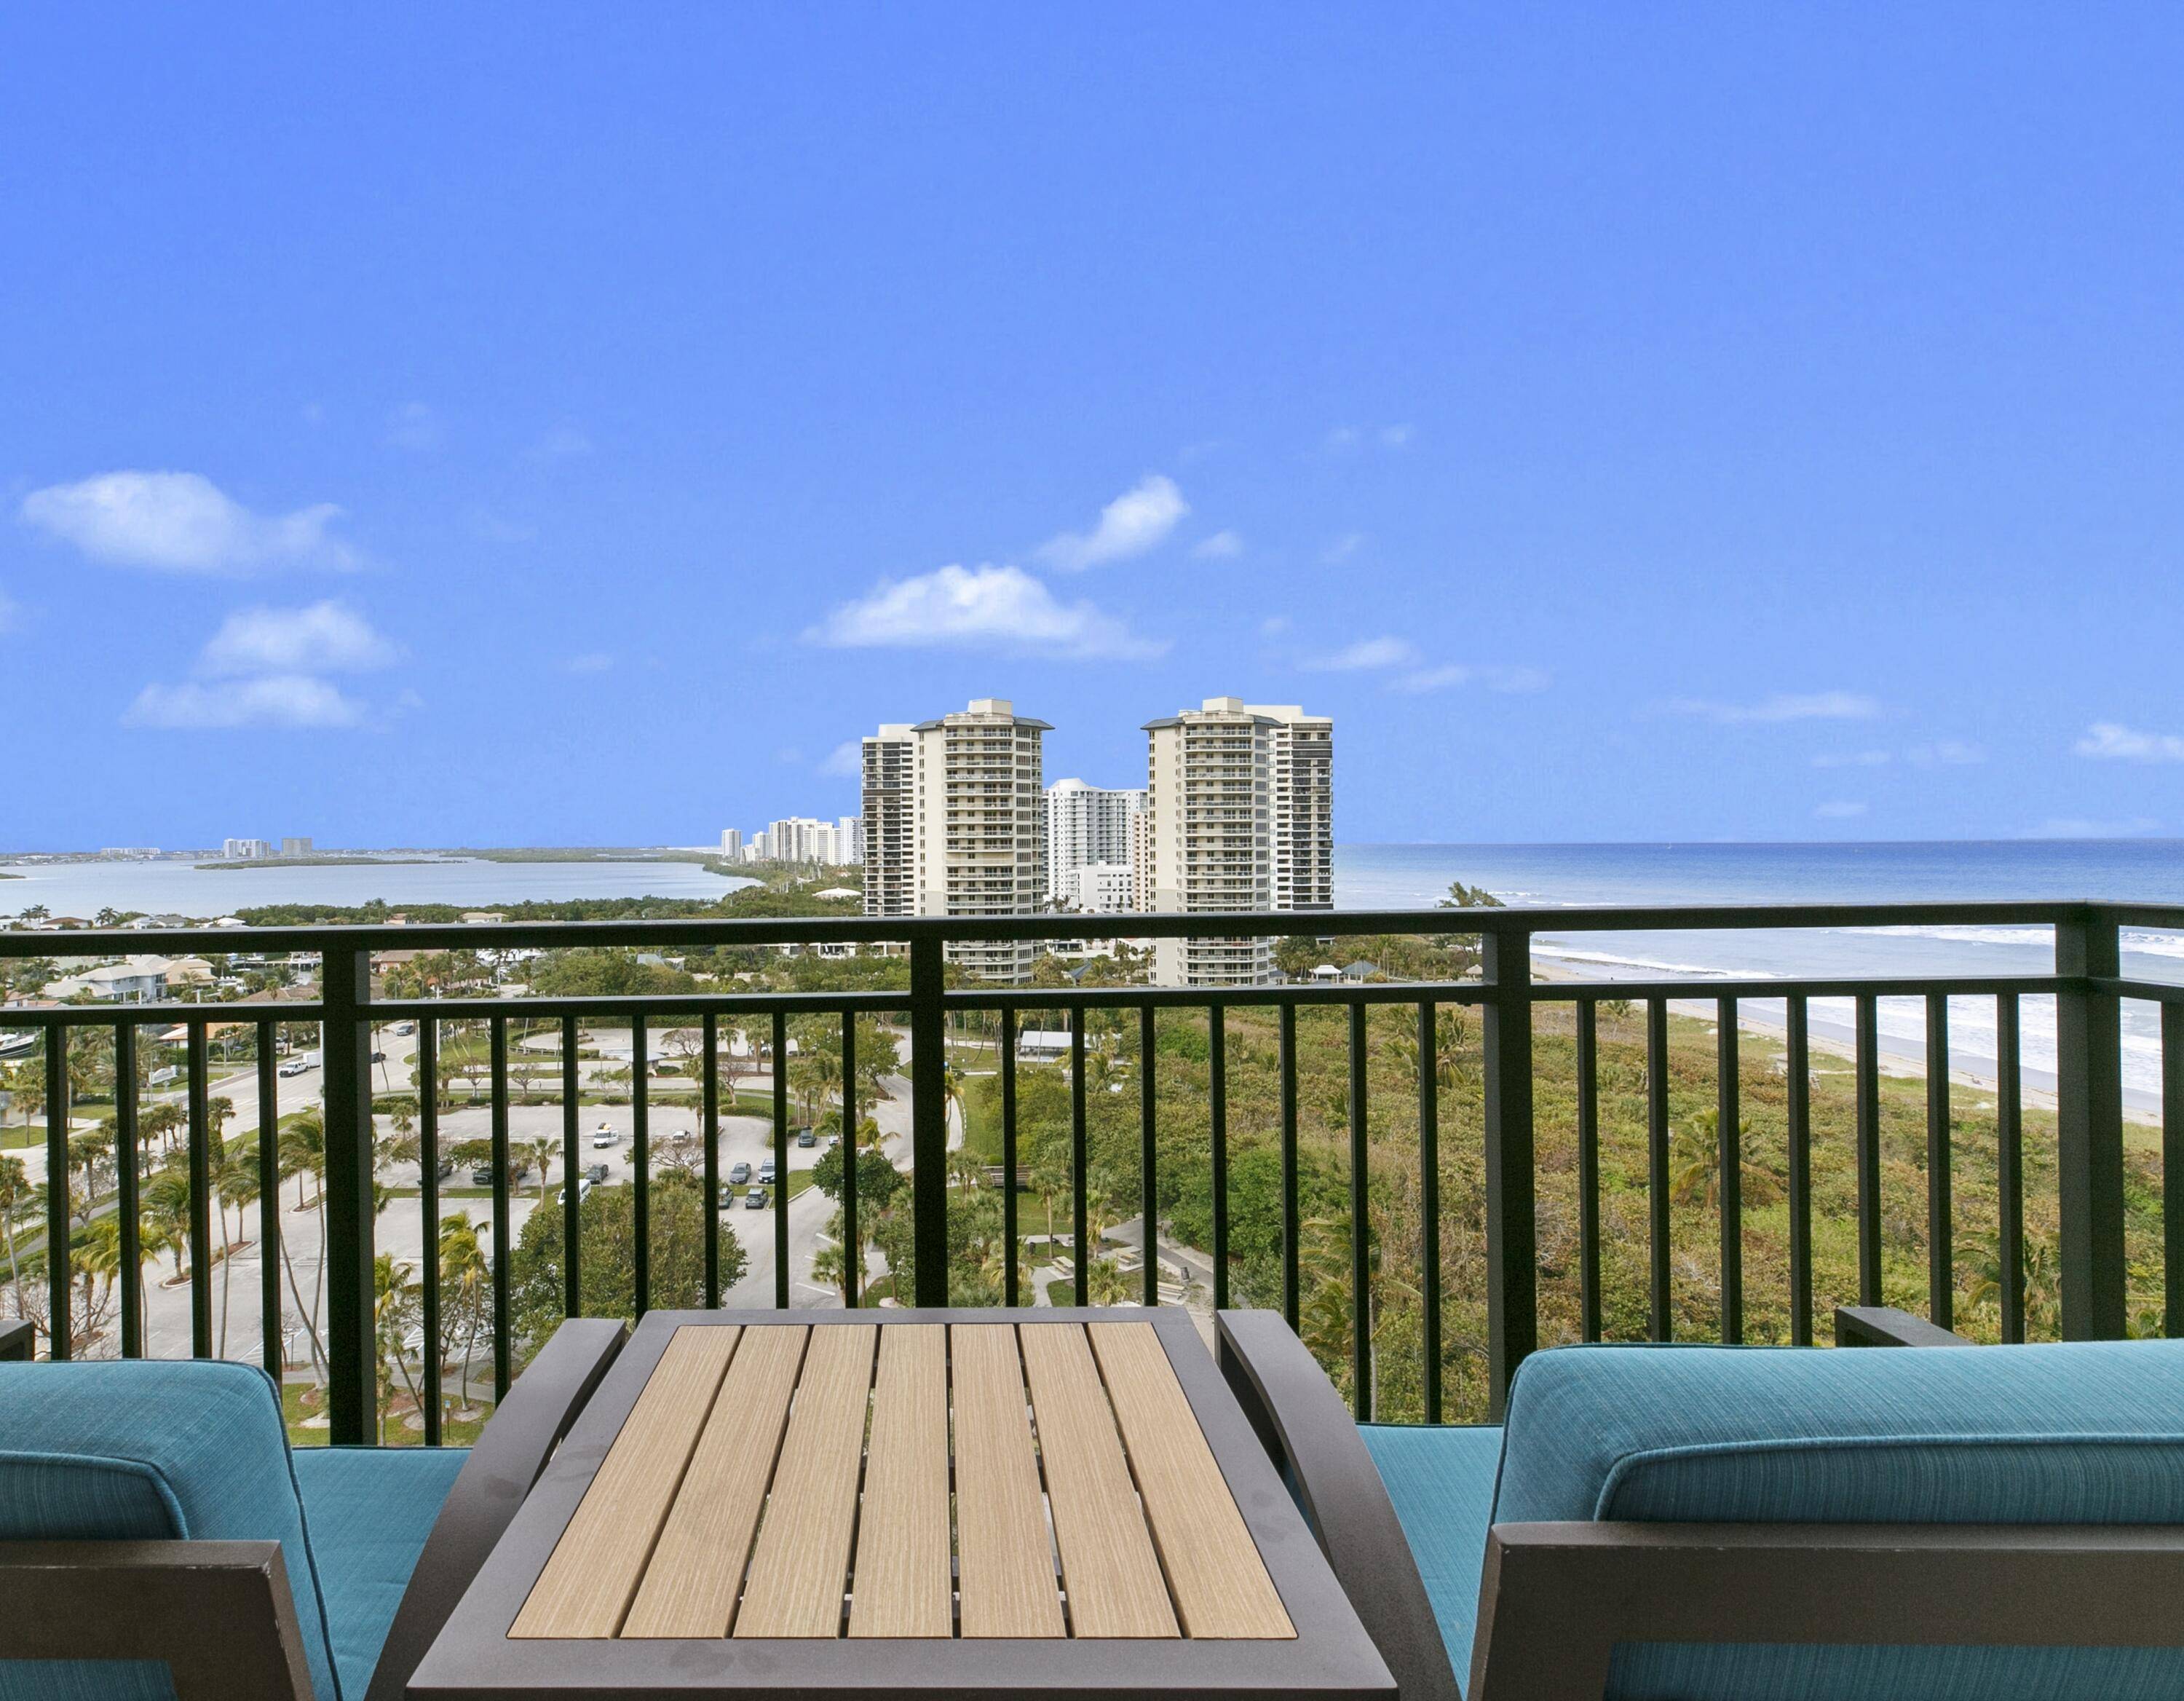 Immerse yourself in the magnificent vistas of the ocean, Intracoastal waterway, and parkland from this fully furnished 14th floor 1 bedroom, 1 bath condo, complete with a special terrace.